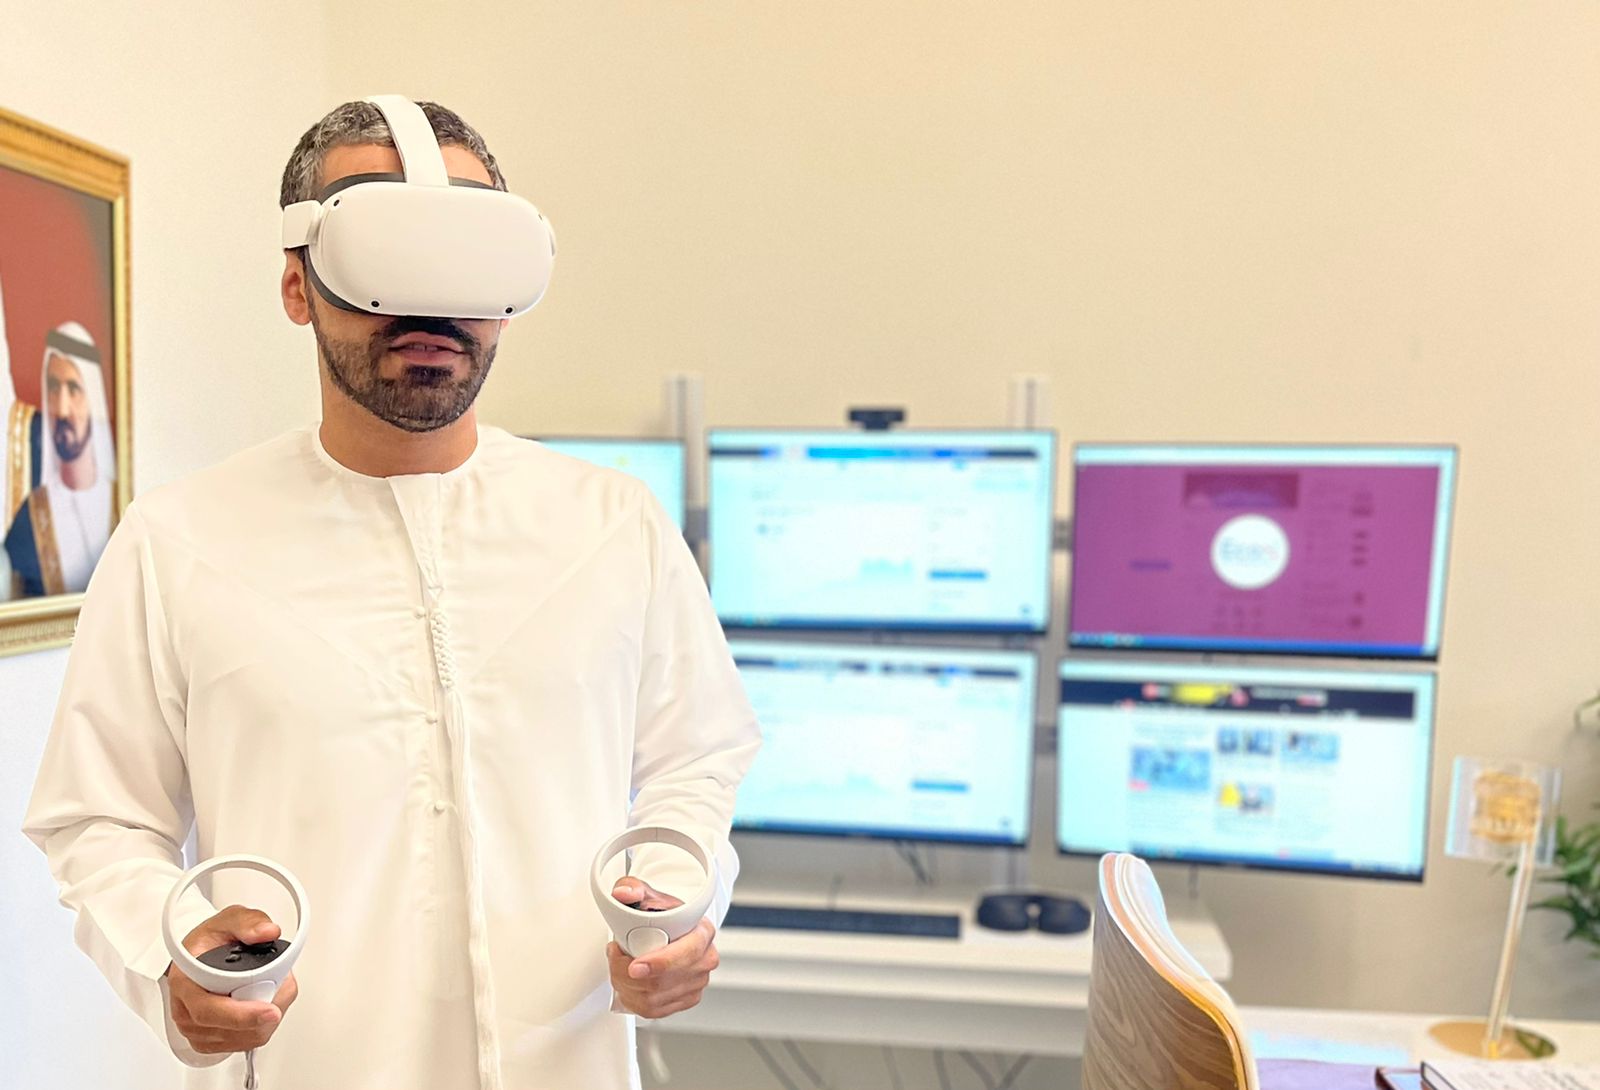 The Metaverse and Immersive Digital Experiences by Ali Abdulhaq Albaloushi